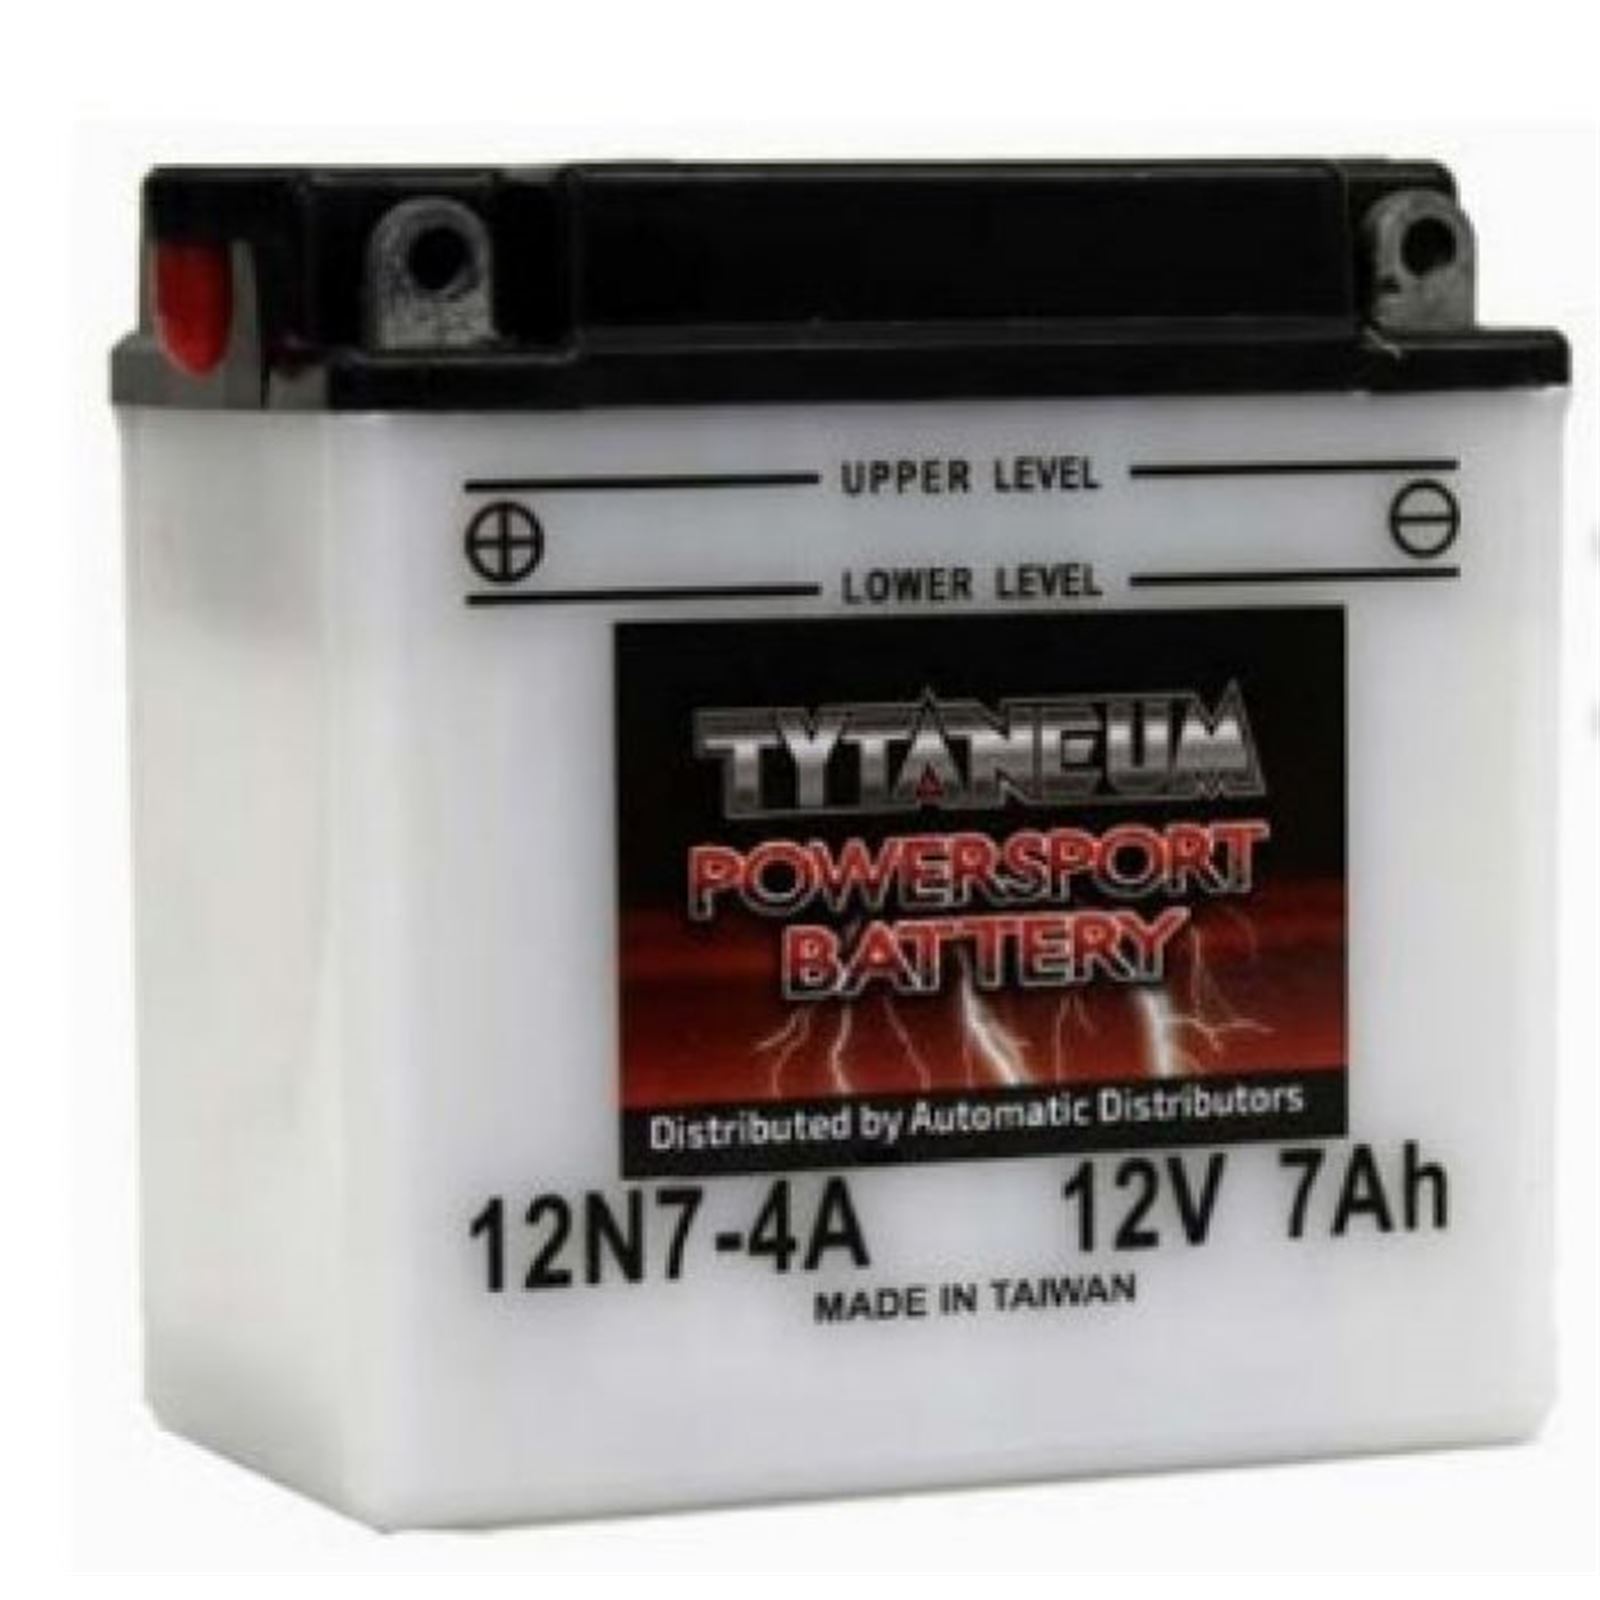 Tytaneum Powersport Battery 12N12A-4A-1, with Acid